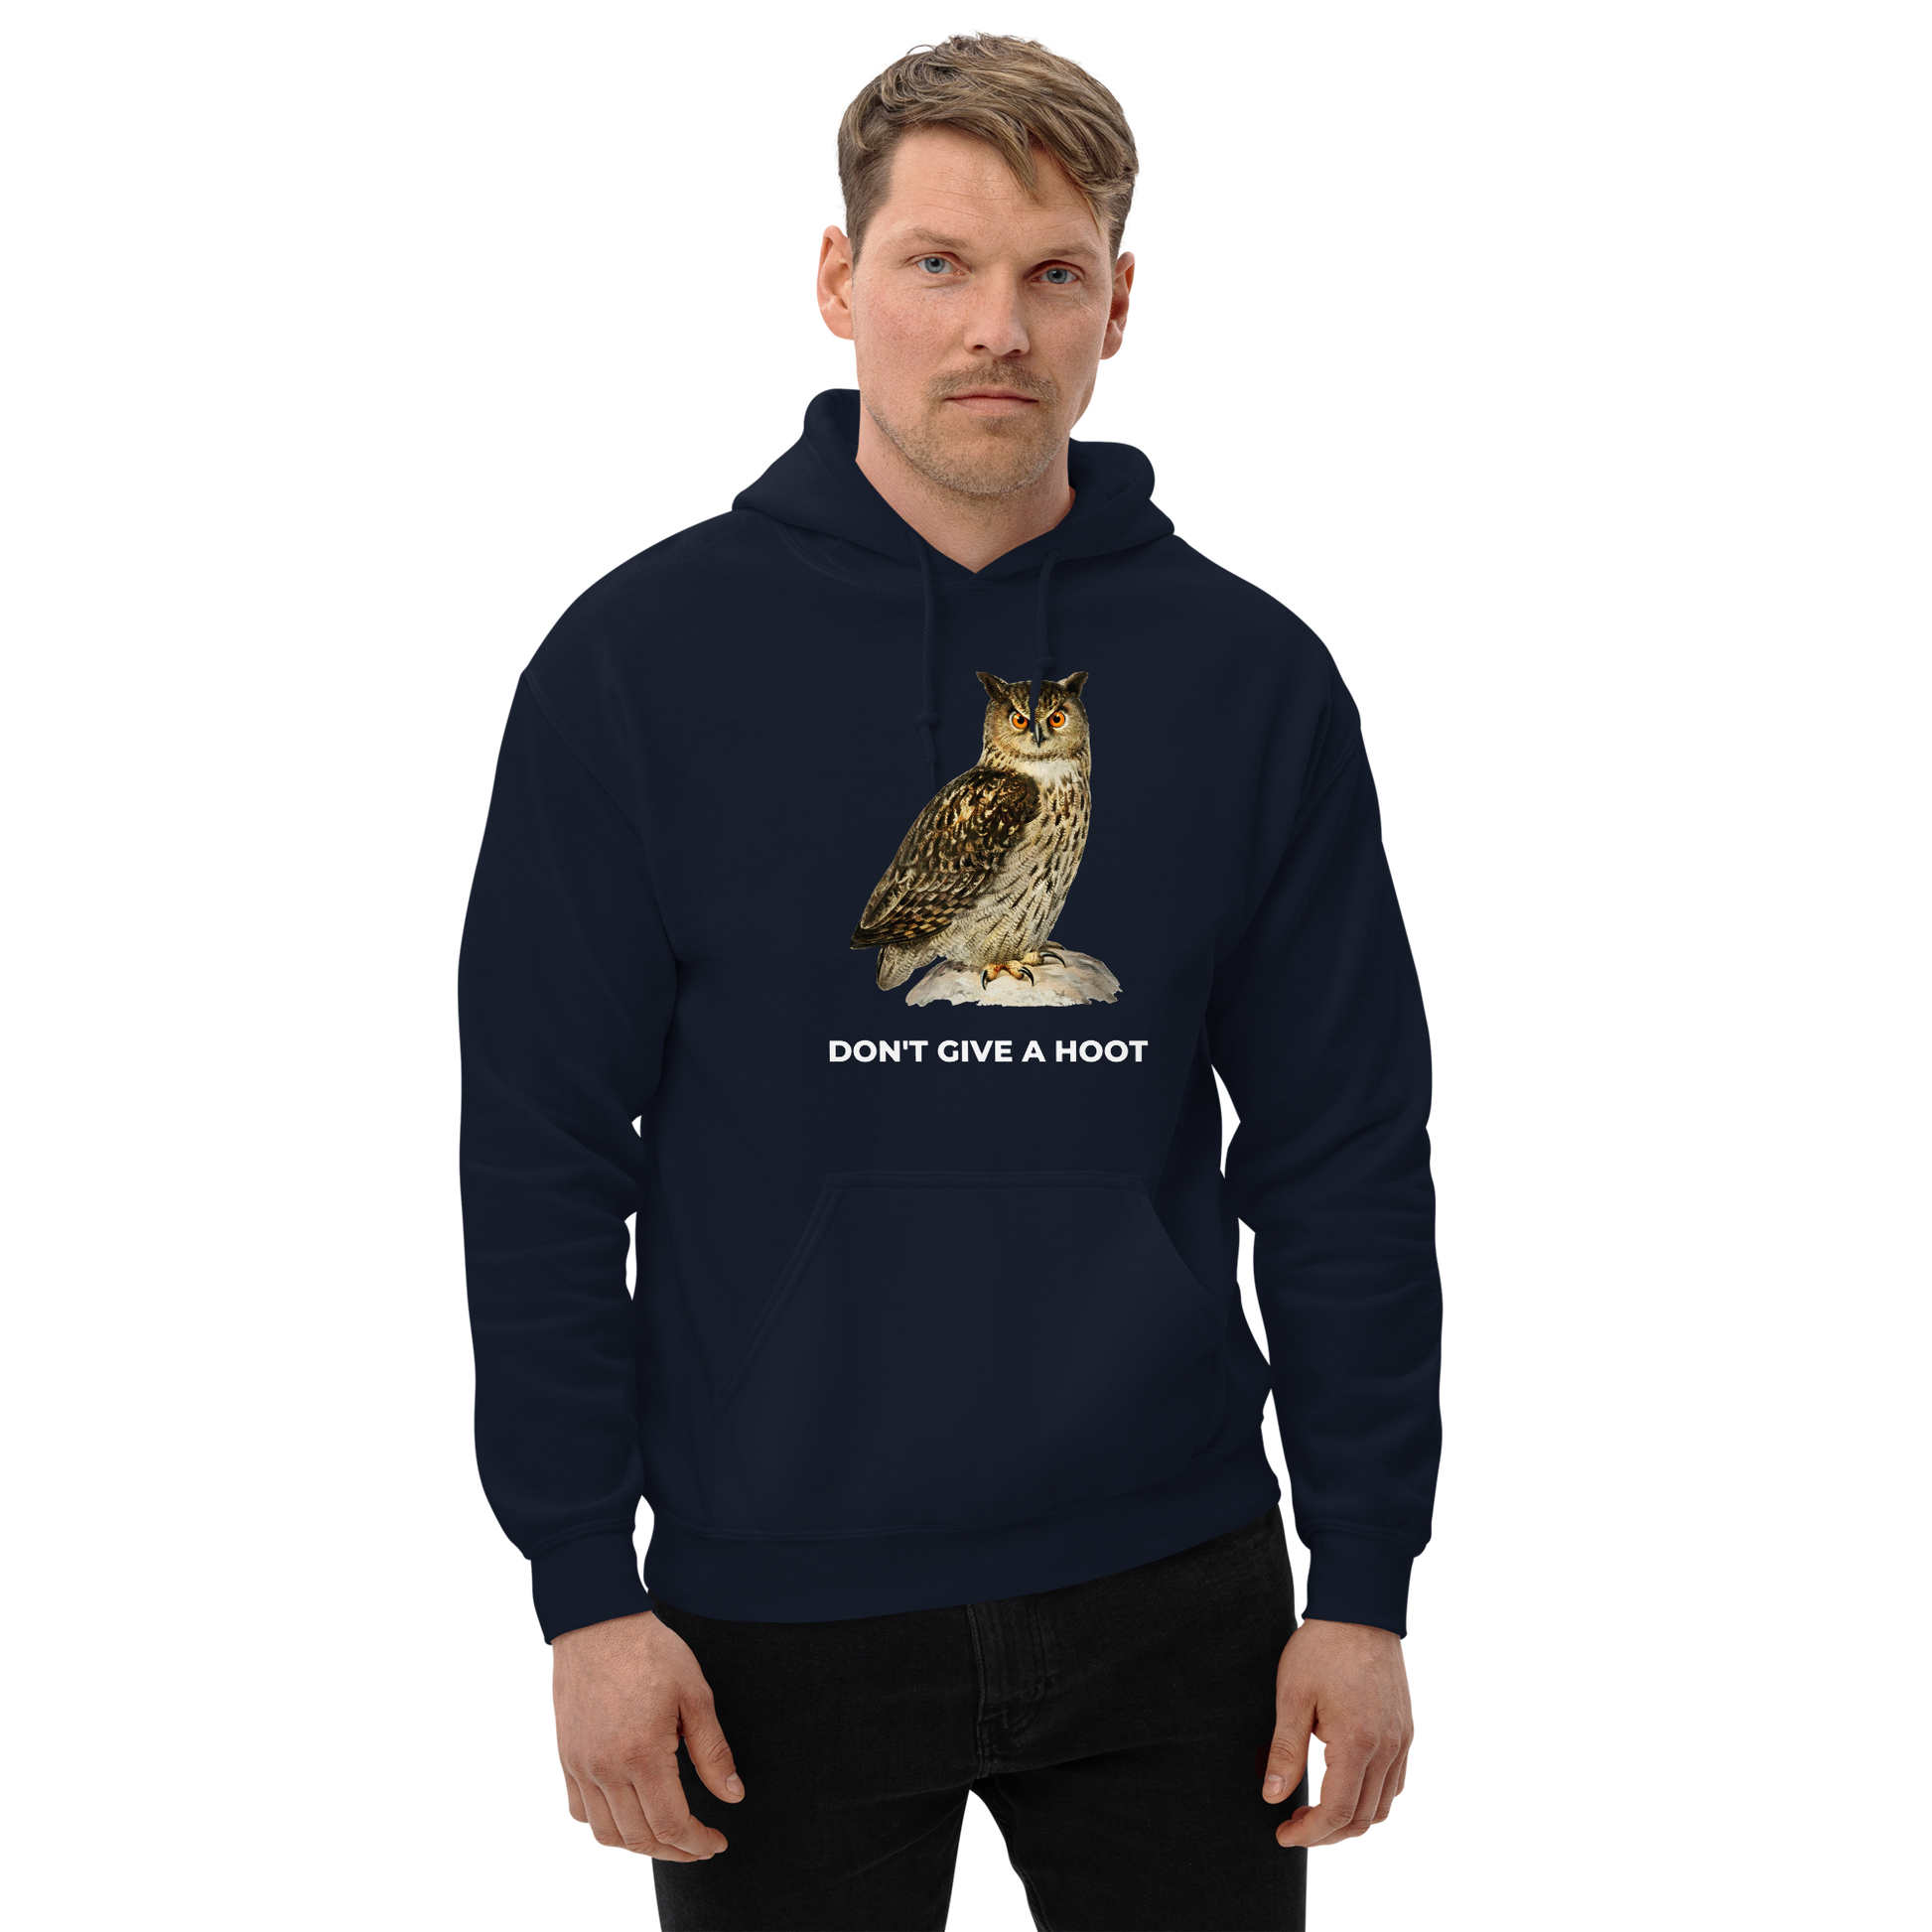 Man wearing a Navy Owl Hoodie featuring a captivating Don't Give A Hoot graphic on the chest - Funny Graphic Owl Hoodies - Boozy Fox